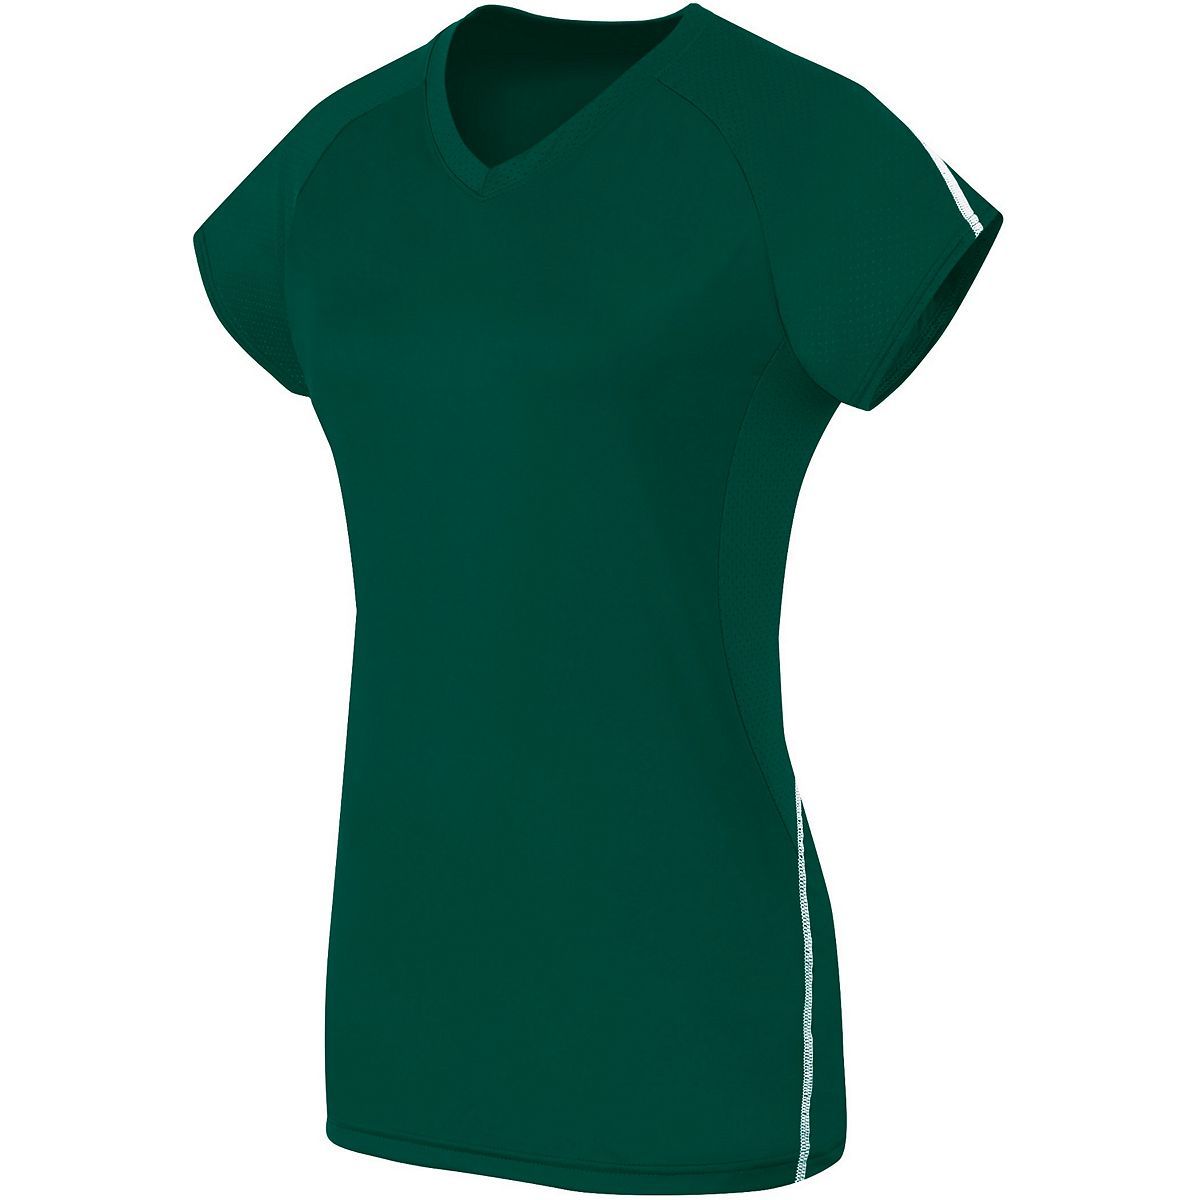 High 5 Ladies Short Sleeve Solid Jersey